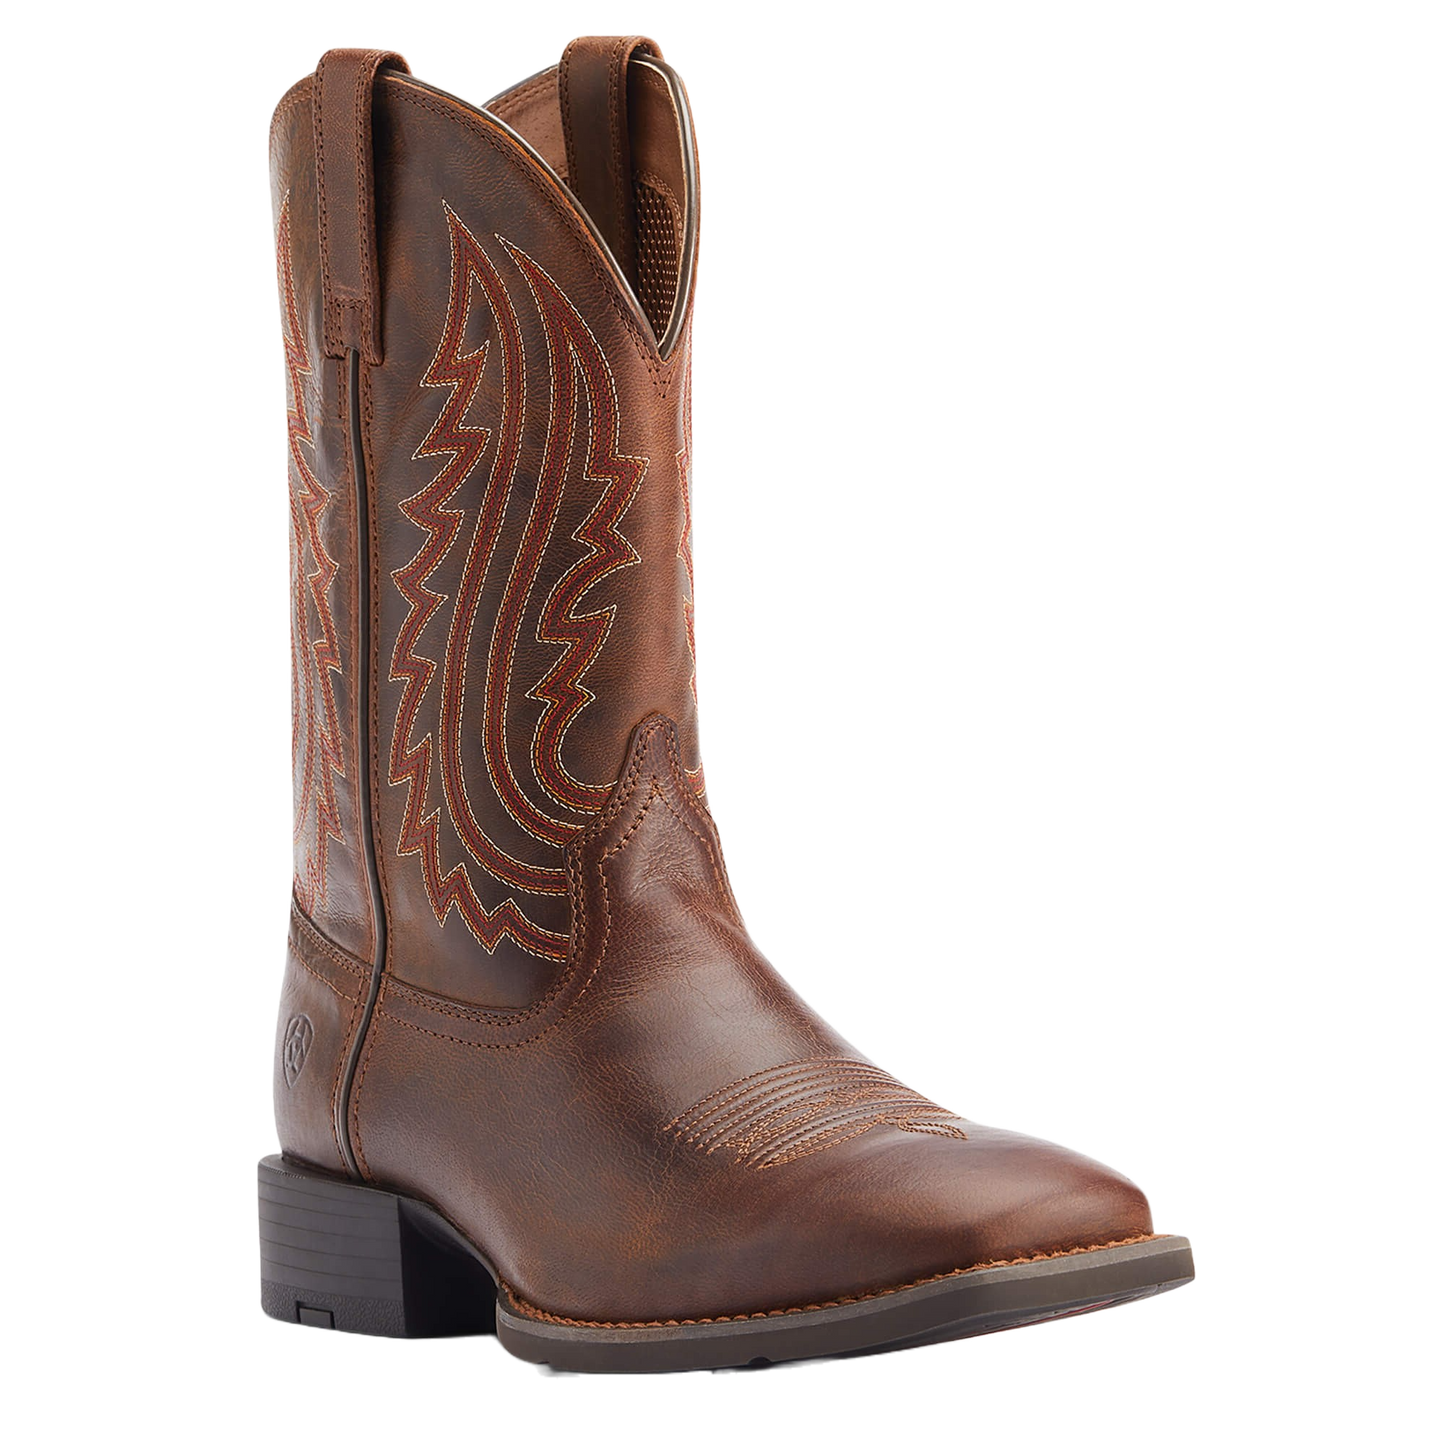 Ariat Men's Sport Big Country Brown Western Boots 10044561